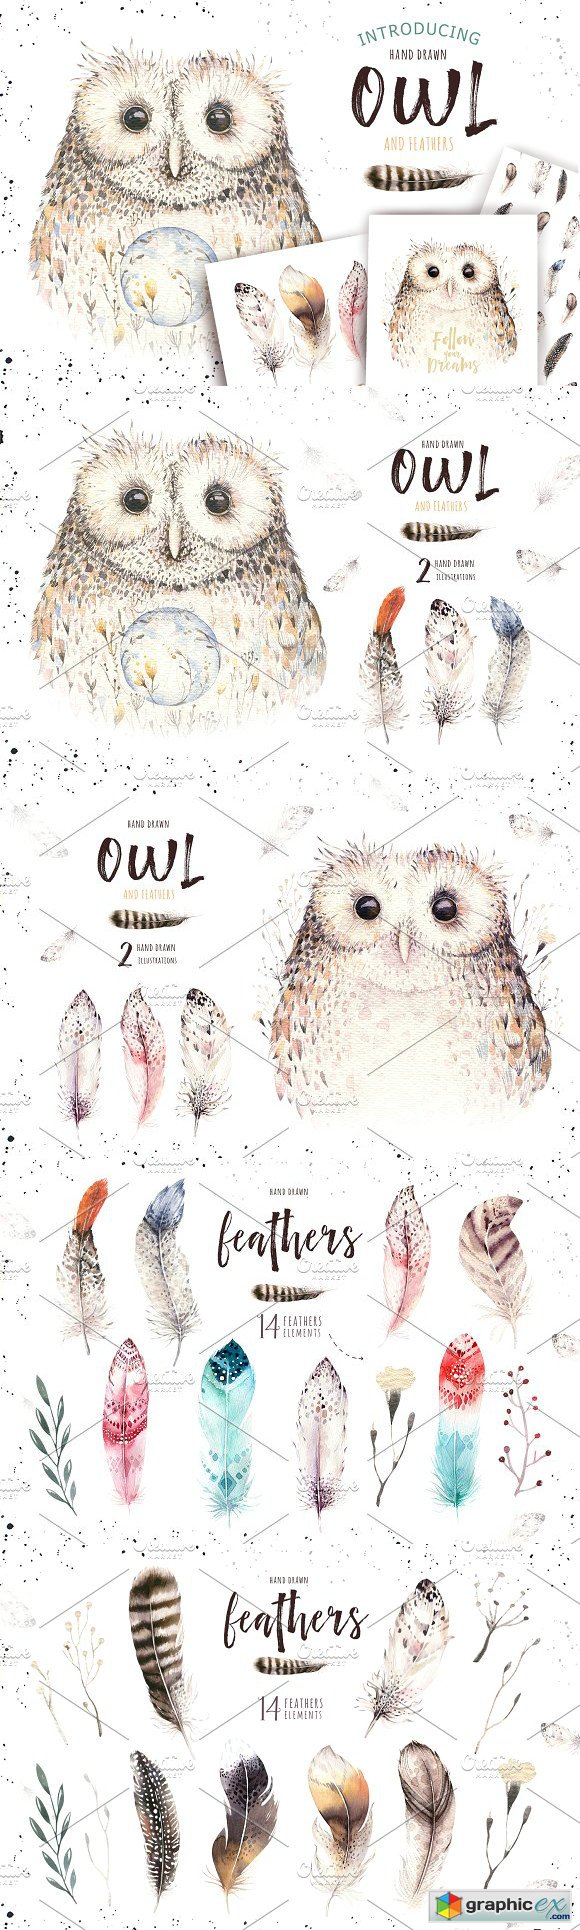 Watercolor owl & feathers collection